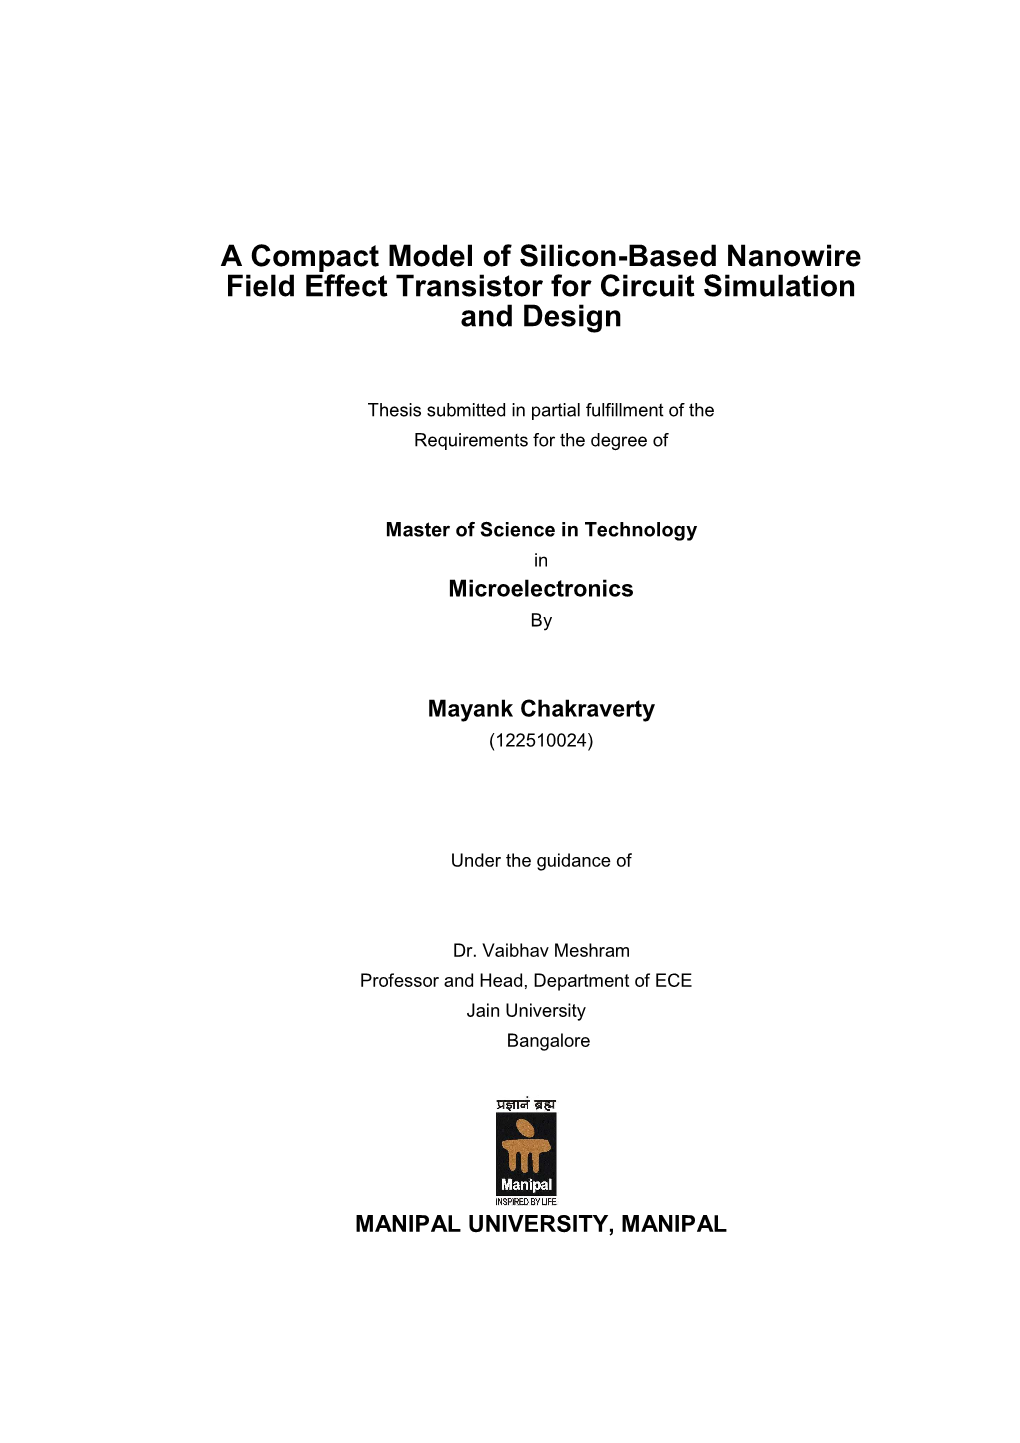 A Compact Model of Silicon-Based Nanowire Field Effect Transistor for Circuit Simulation and Design